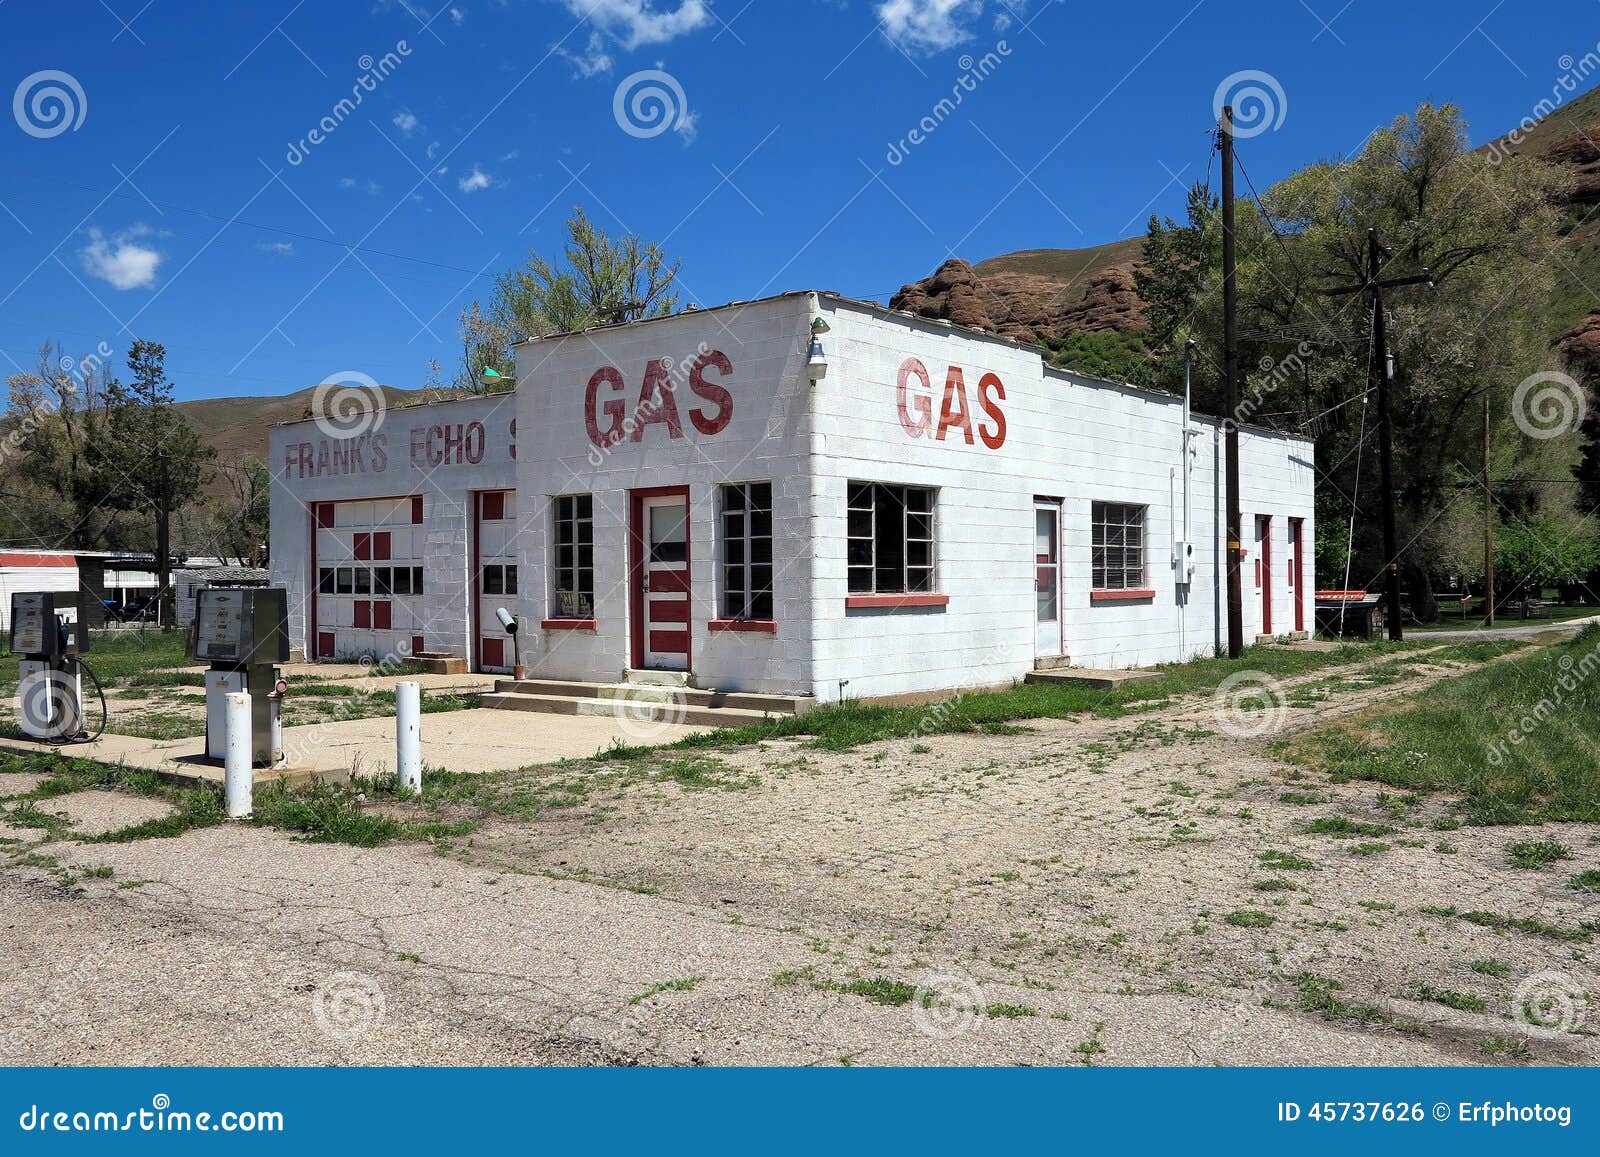 How to Write a Business Plan for a Gas Station